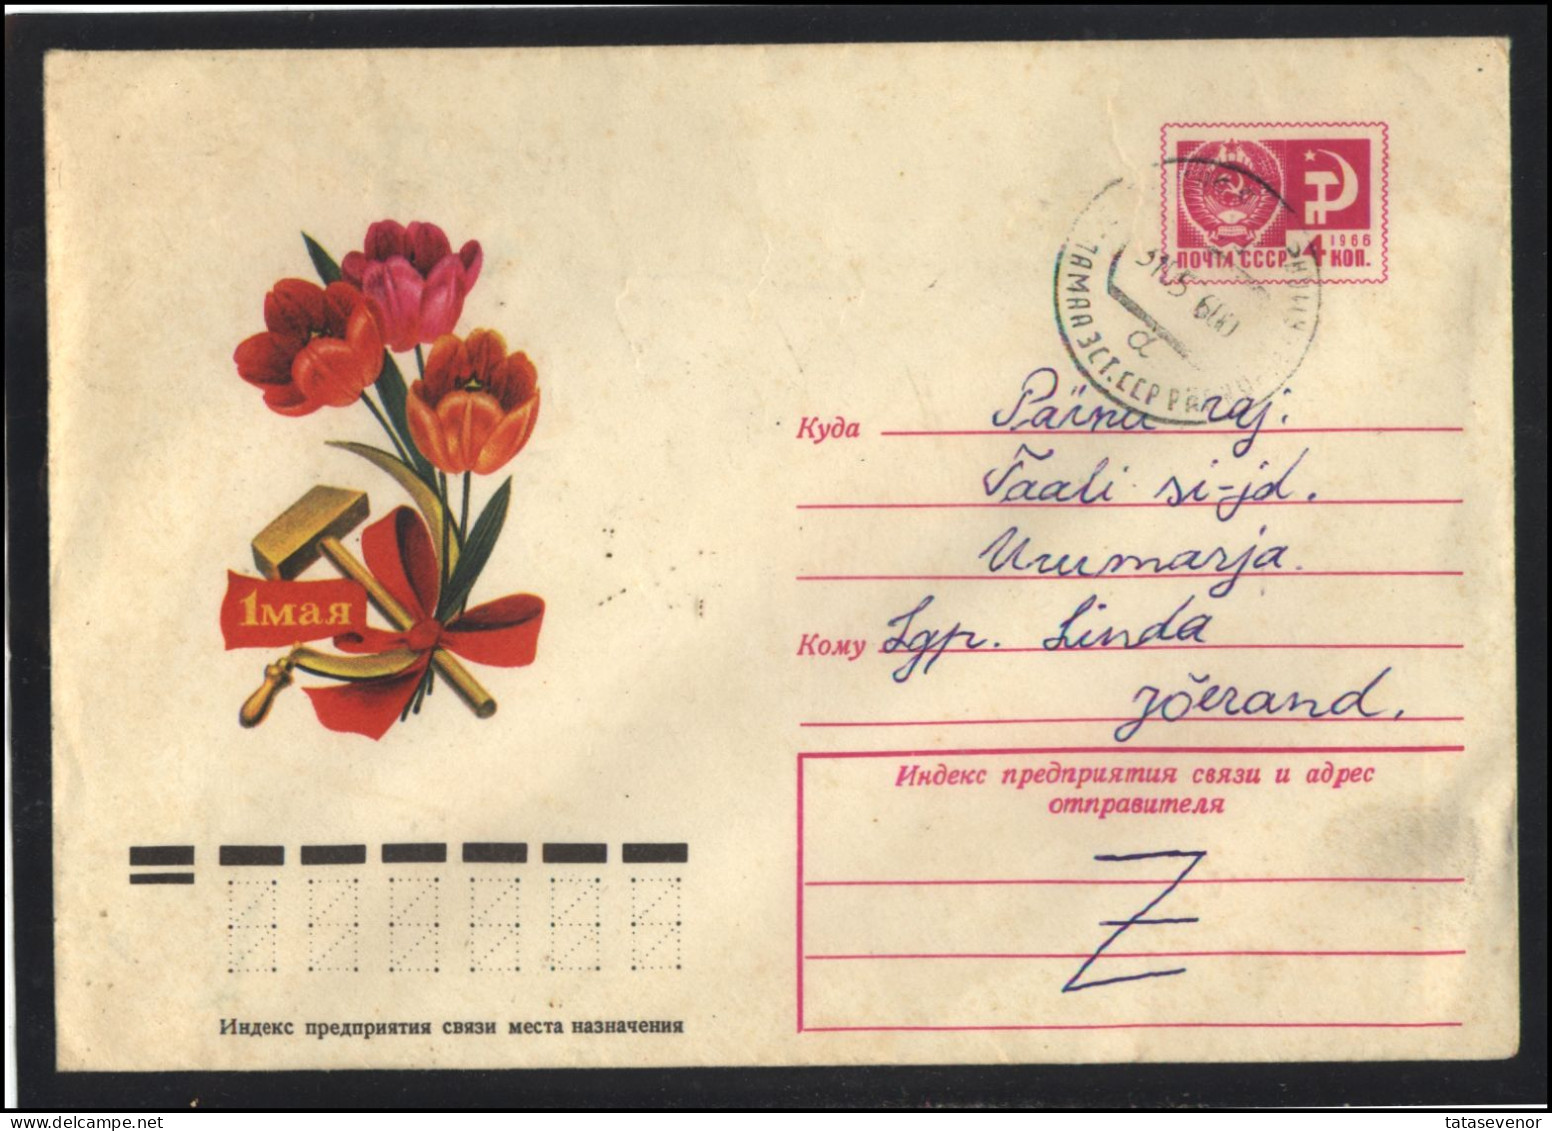 RUSSIA USSR Stationery USED ESTONIA AMBL 1359 AIAMAA May Day Celebration Flowers Tulips - Unclassified